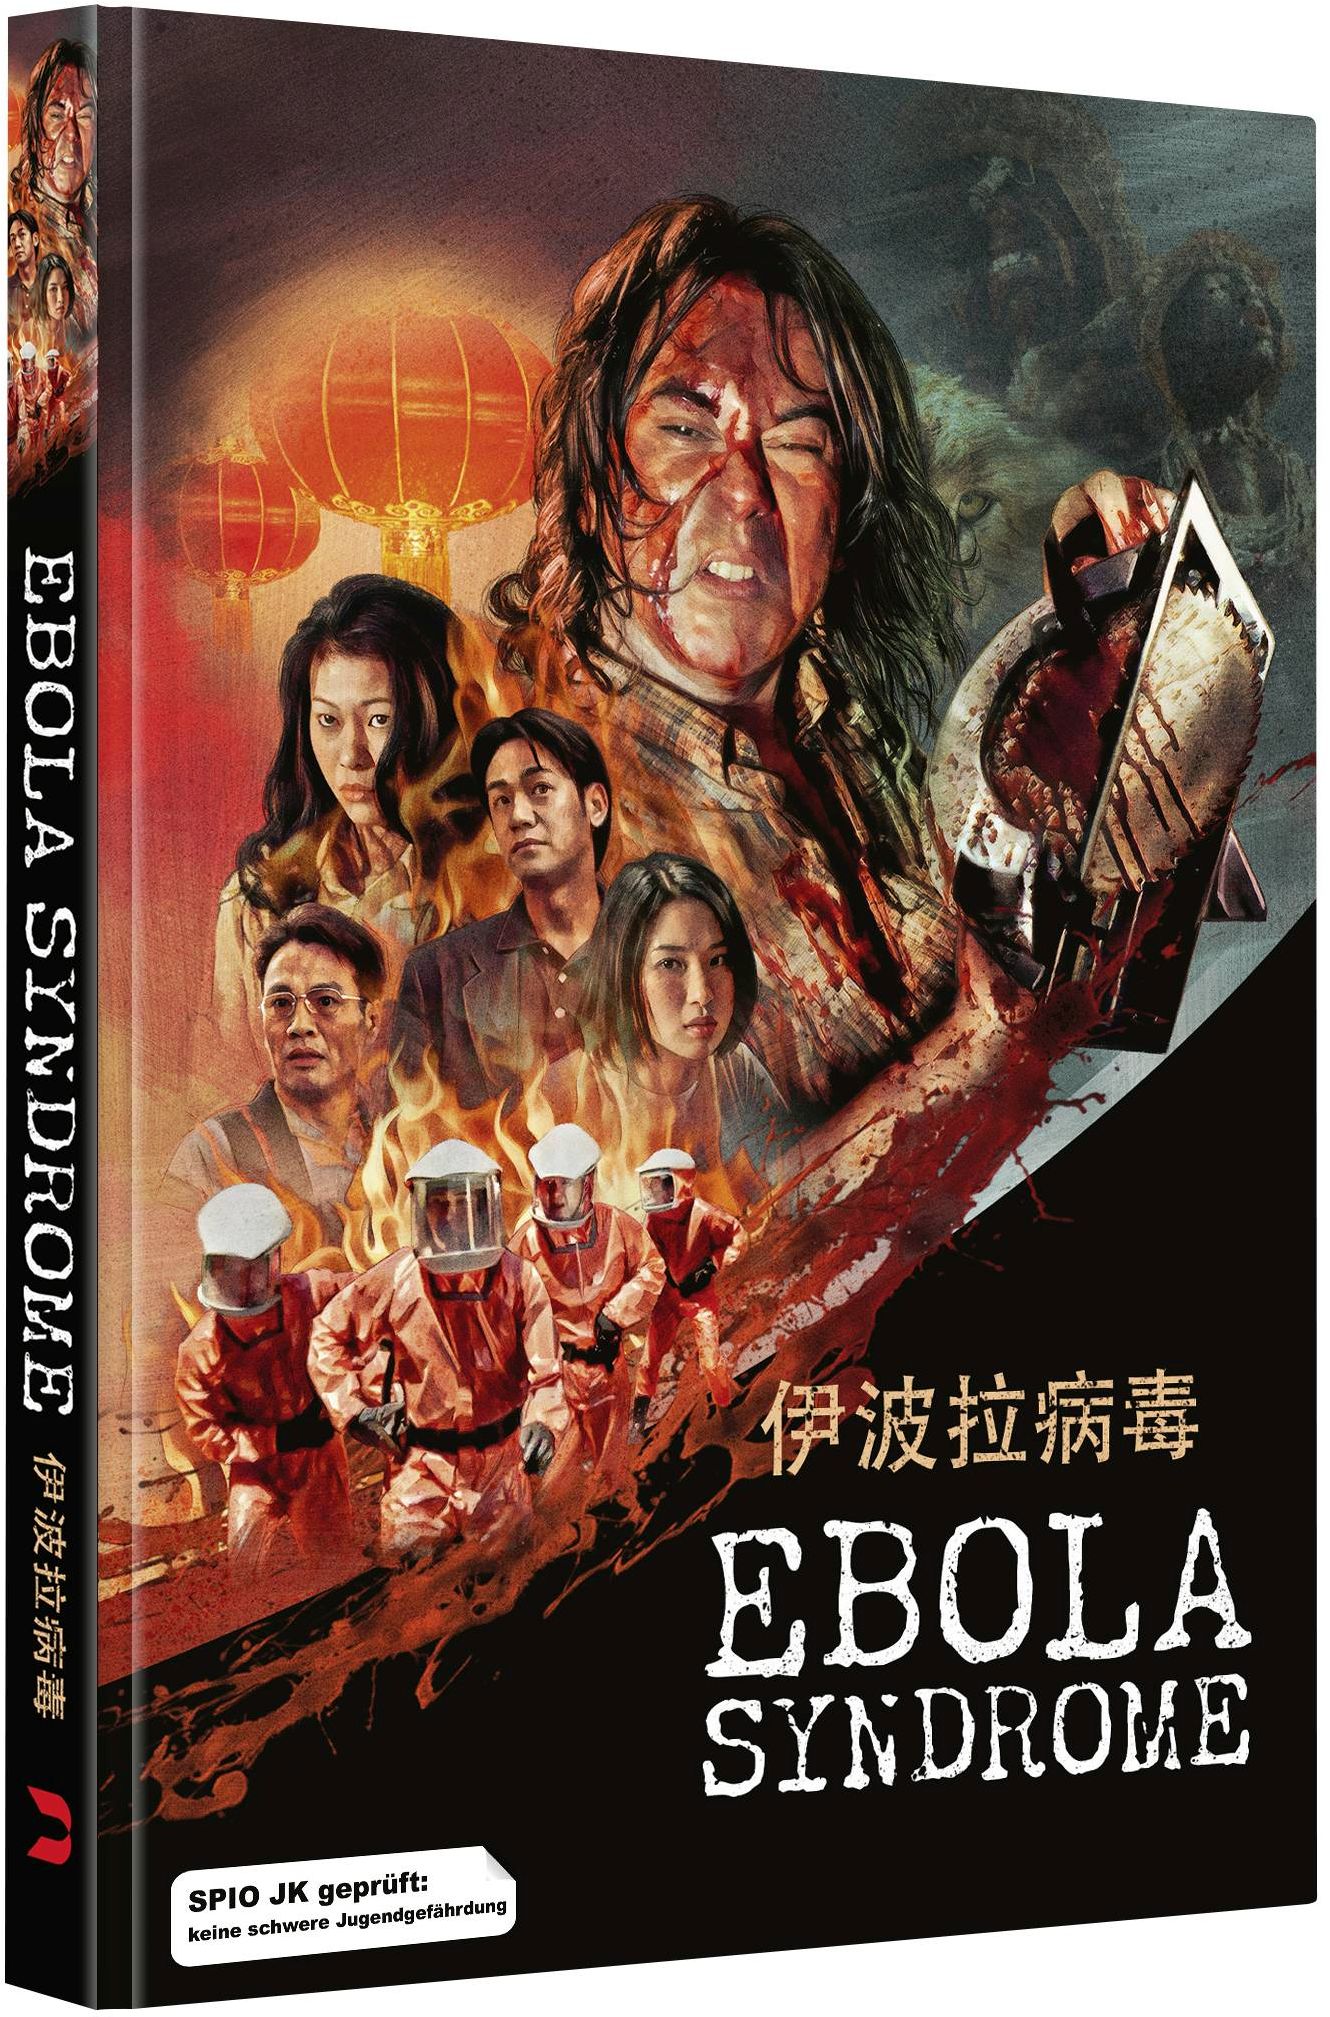 Ebola-Syndrome_MB_Stephan-Pusch-Packshot_COVER-A_Clean.jpg